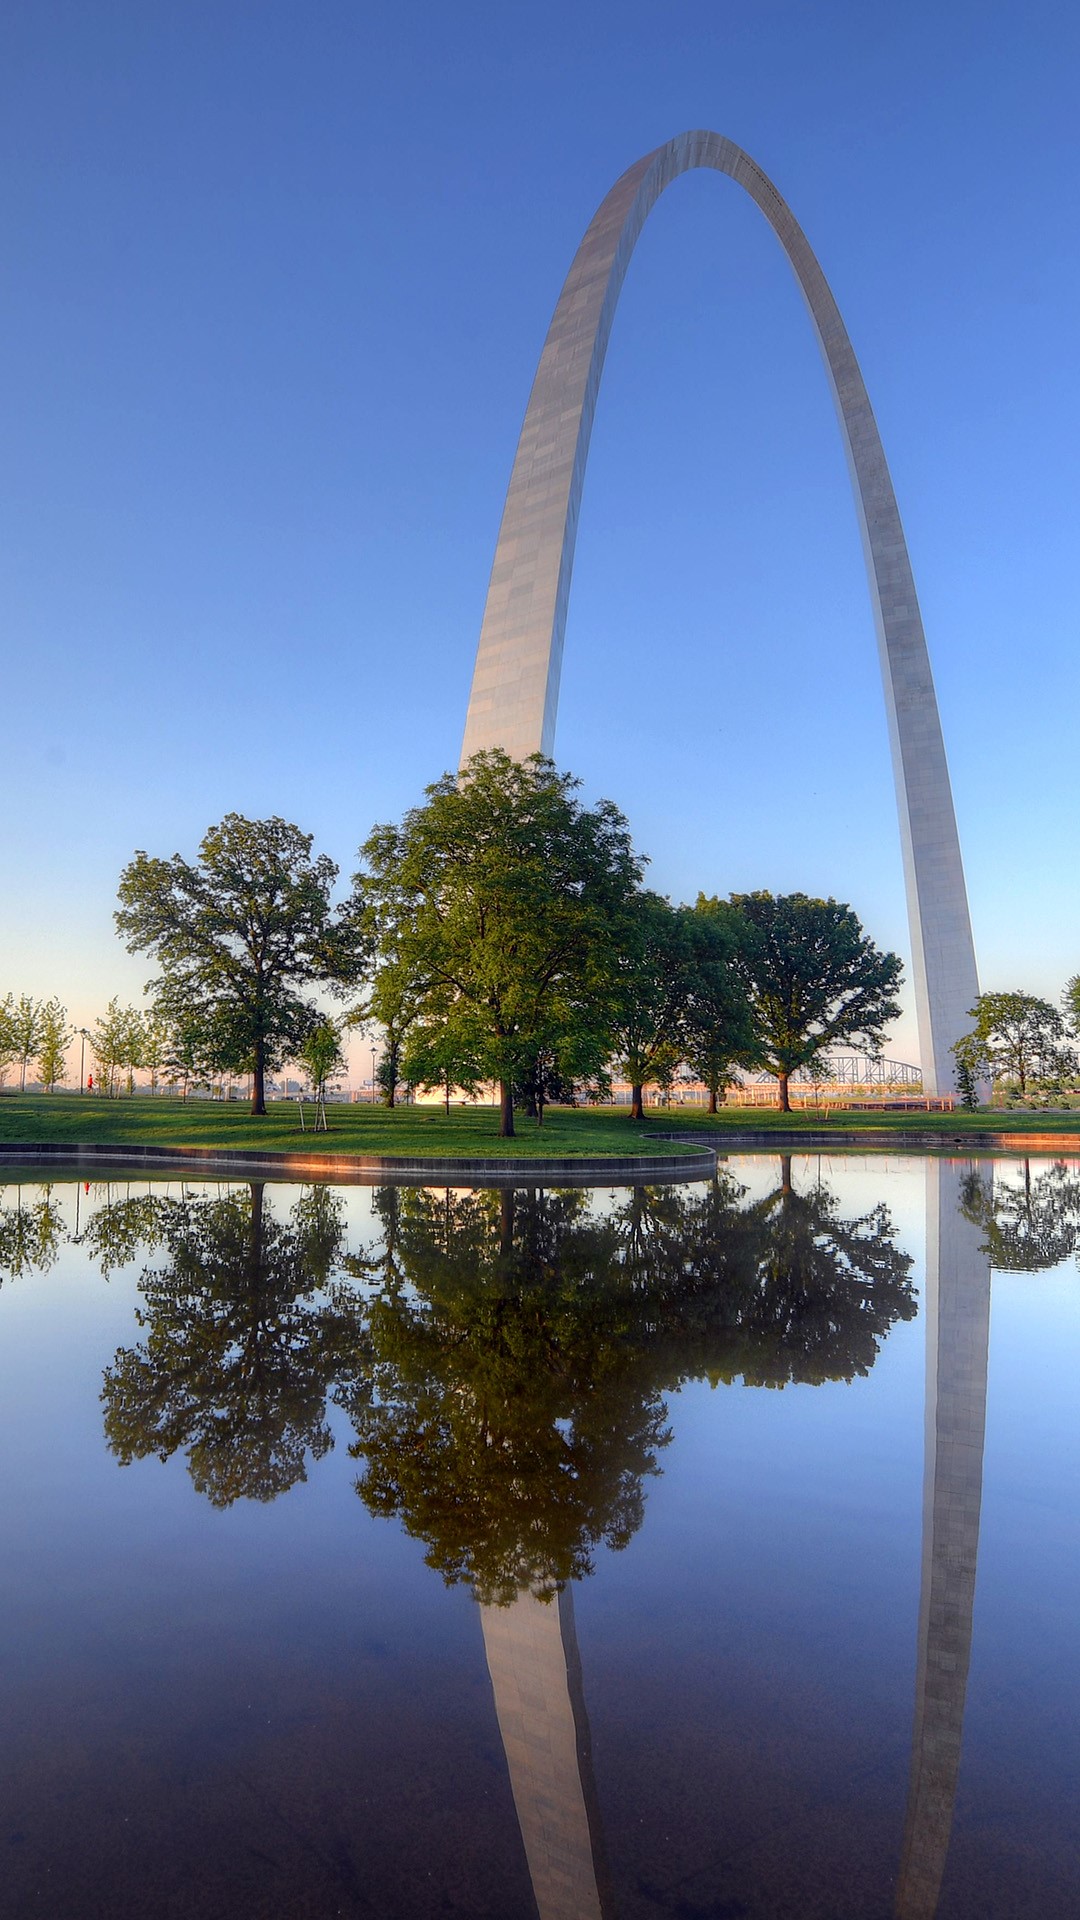 The Gateway Arch monument in St. Louis, Missouri, USA | Windows 10 Spotlight Images